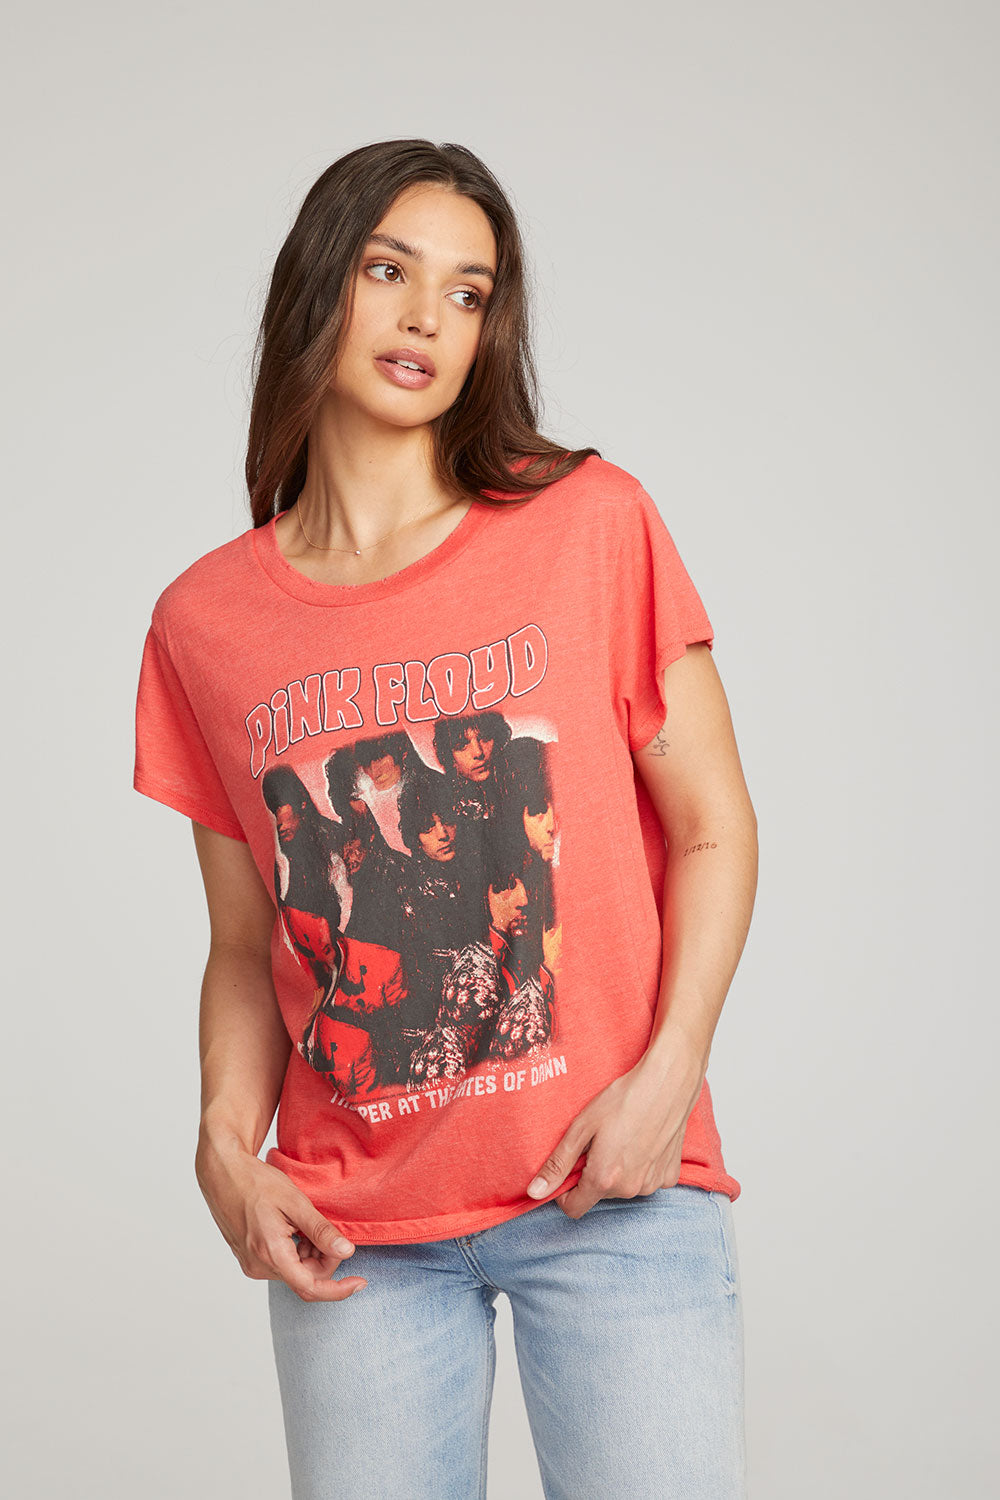 Pink Floyd The Piper Tee WOMENS chaserbrand